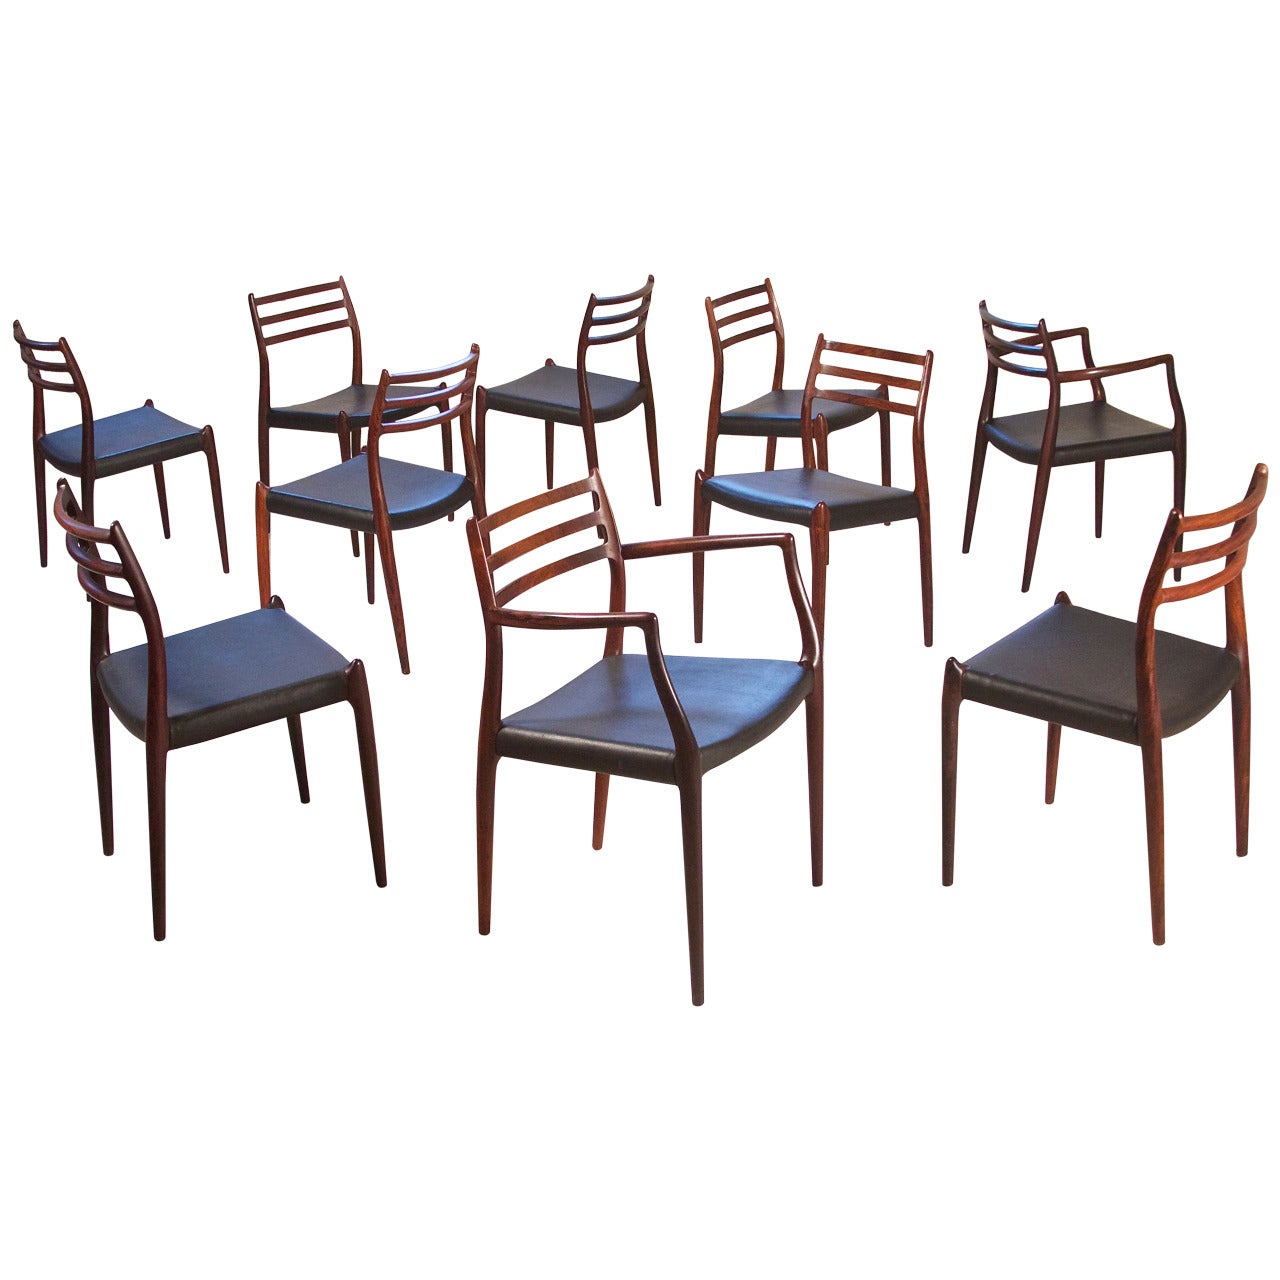 Set of Ten "Carver's Chairs" by Niels Otto Møller